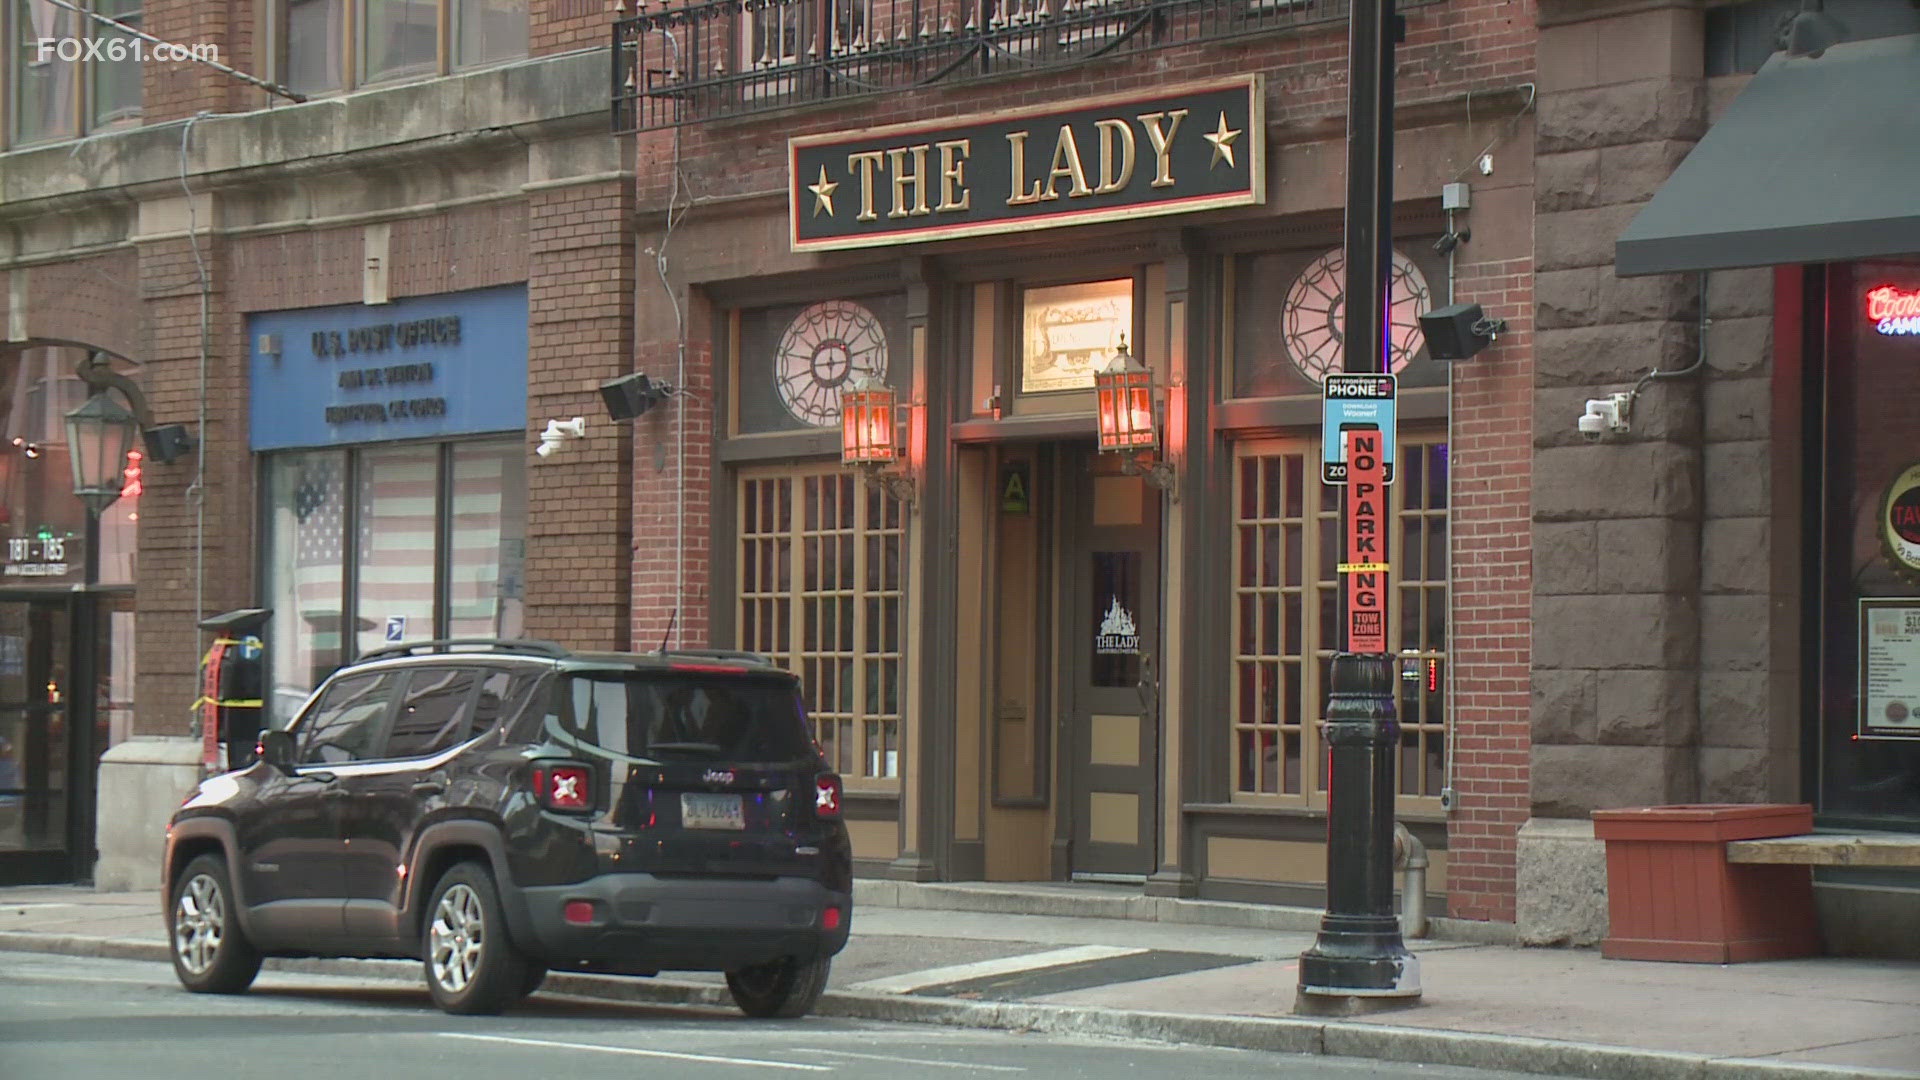 A well-known bar in Hartford is back open. Formerly known as "The Russian Lady," "The Lady" is now open for business.